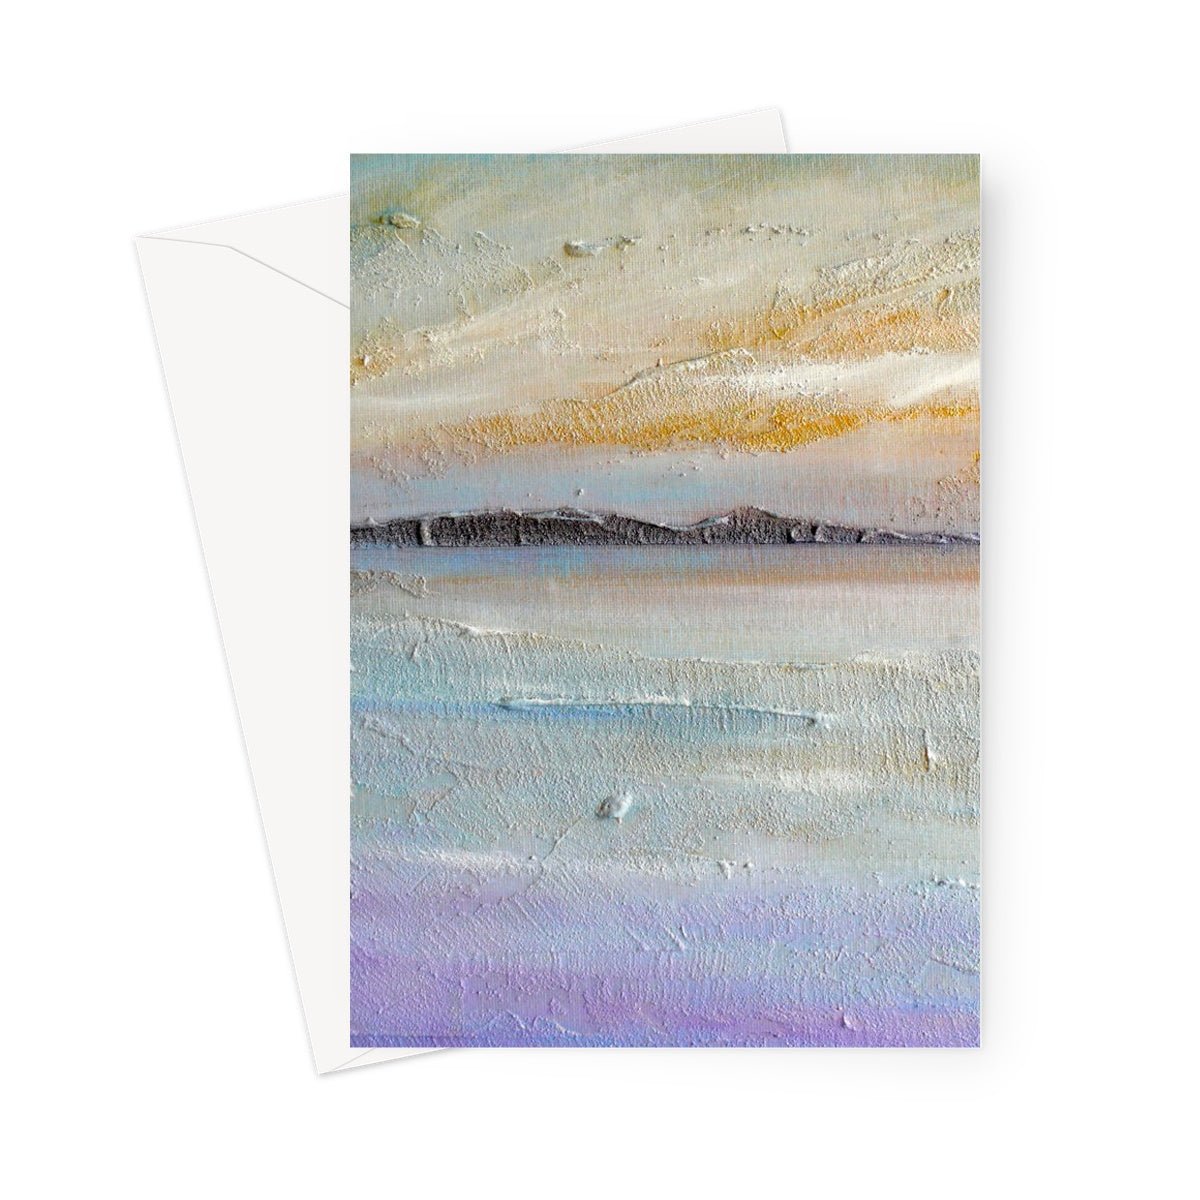 Sollas Beach South Uist Art Gifts Greeting Card-Greetings Cards-Hebridean Islands Art Gallery-5"x7"-10 Cards-Paintings, Prints, Homeware, Art Gifts From Scotland By Scottish Artist Kevin Hunter